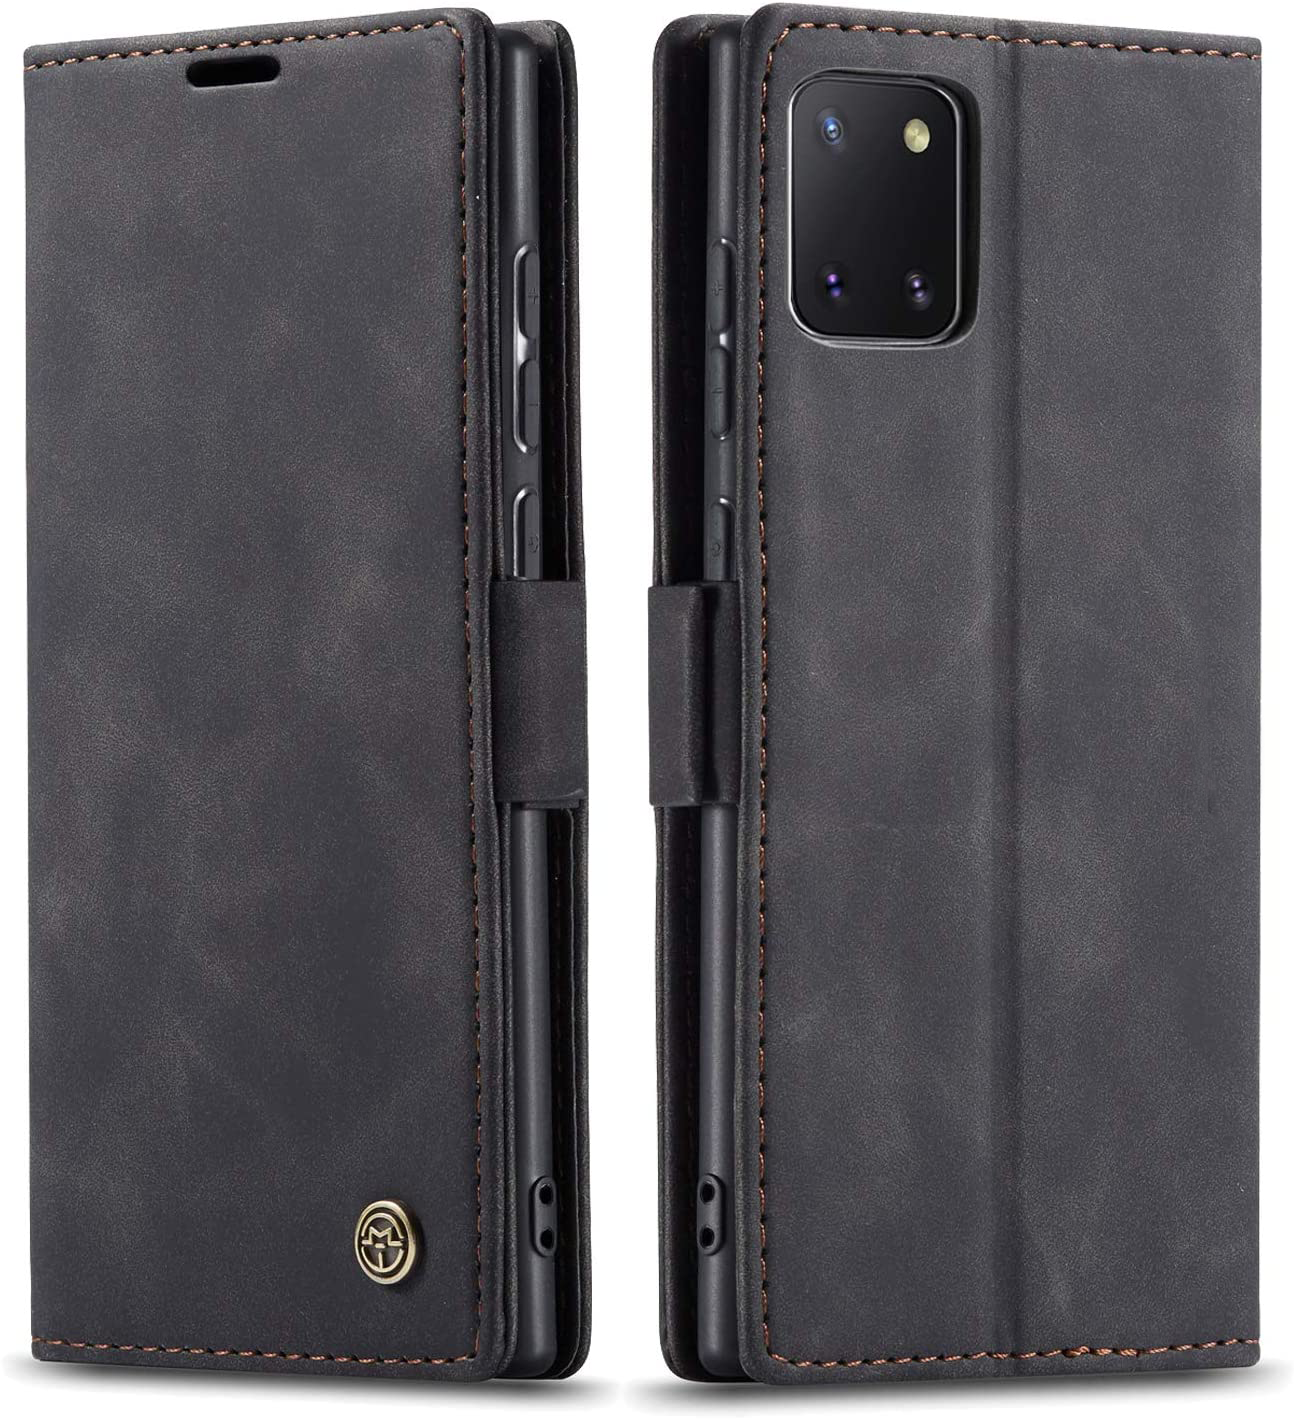 Samsung Galaxy Note 10 Lite black color leather wallet flip cover case By excelsior